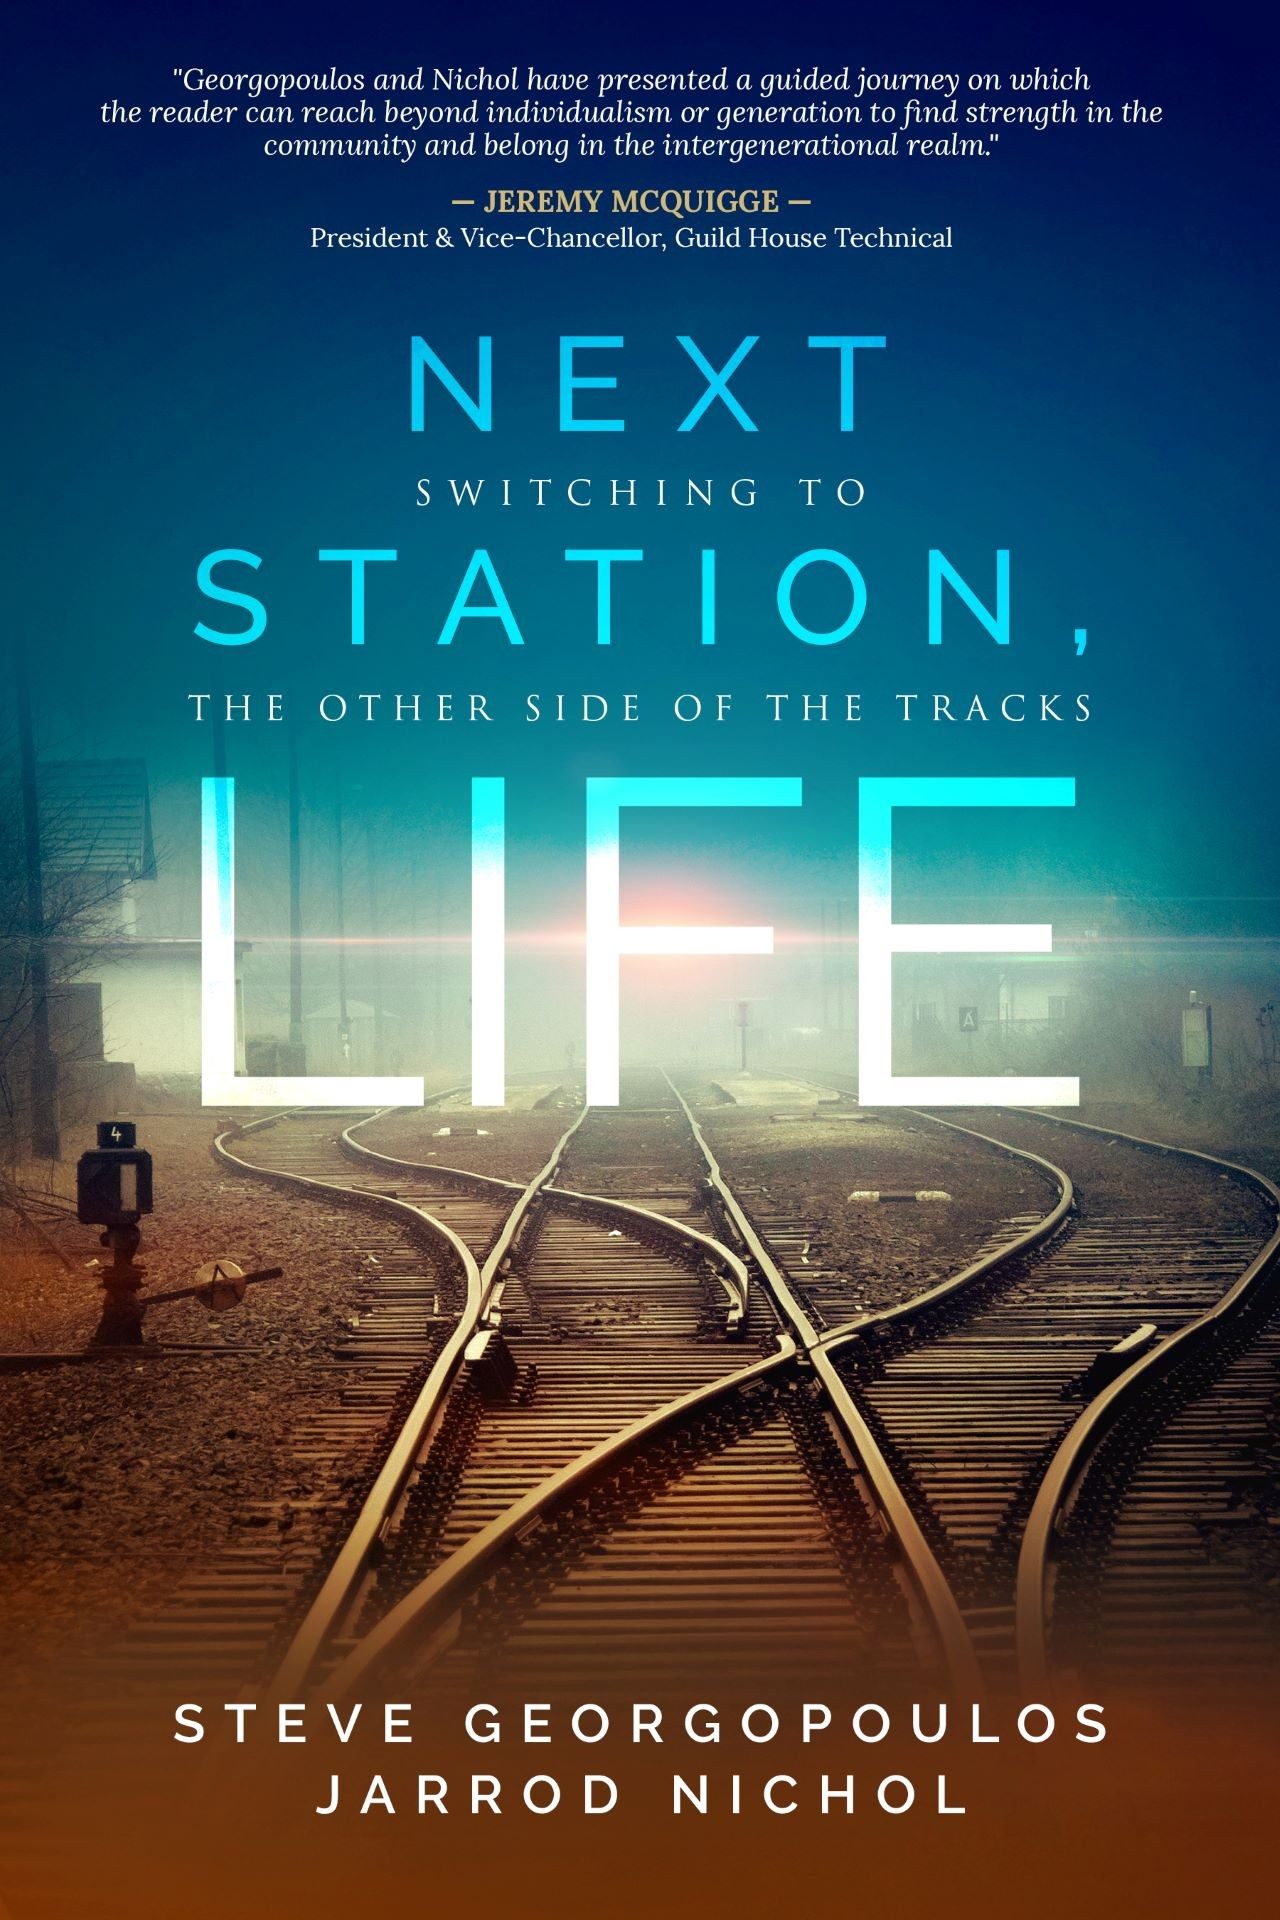 Cover of 'Next Station, The Other Side of the Tracks' by Steve Georgopoulos and Jarrod Nichol, depicting a foggy railroad scene symbolizing journey and discovery.